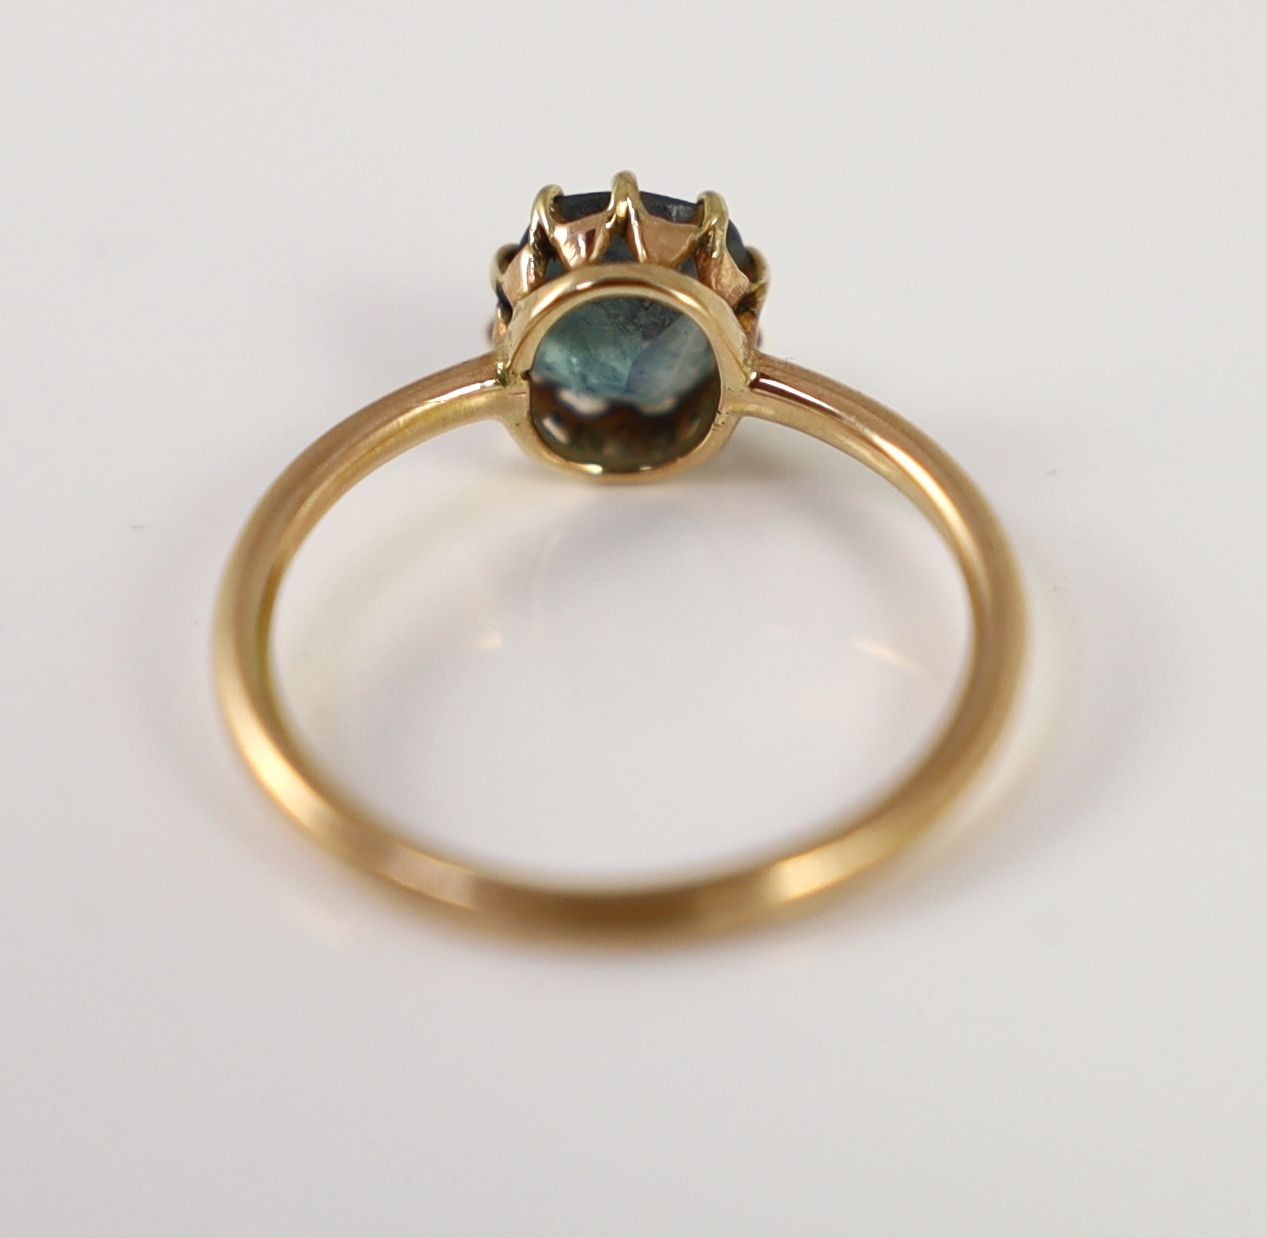 An early 20th century gold and oval cut Alexandrite set ring